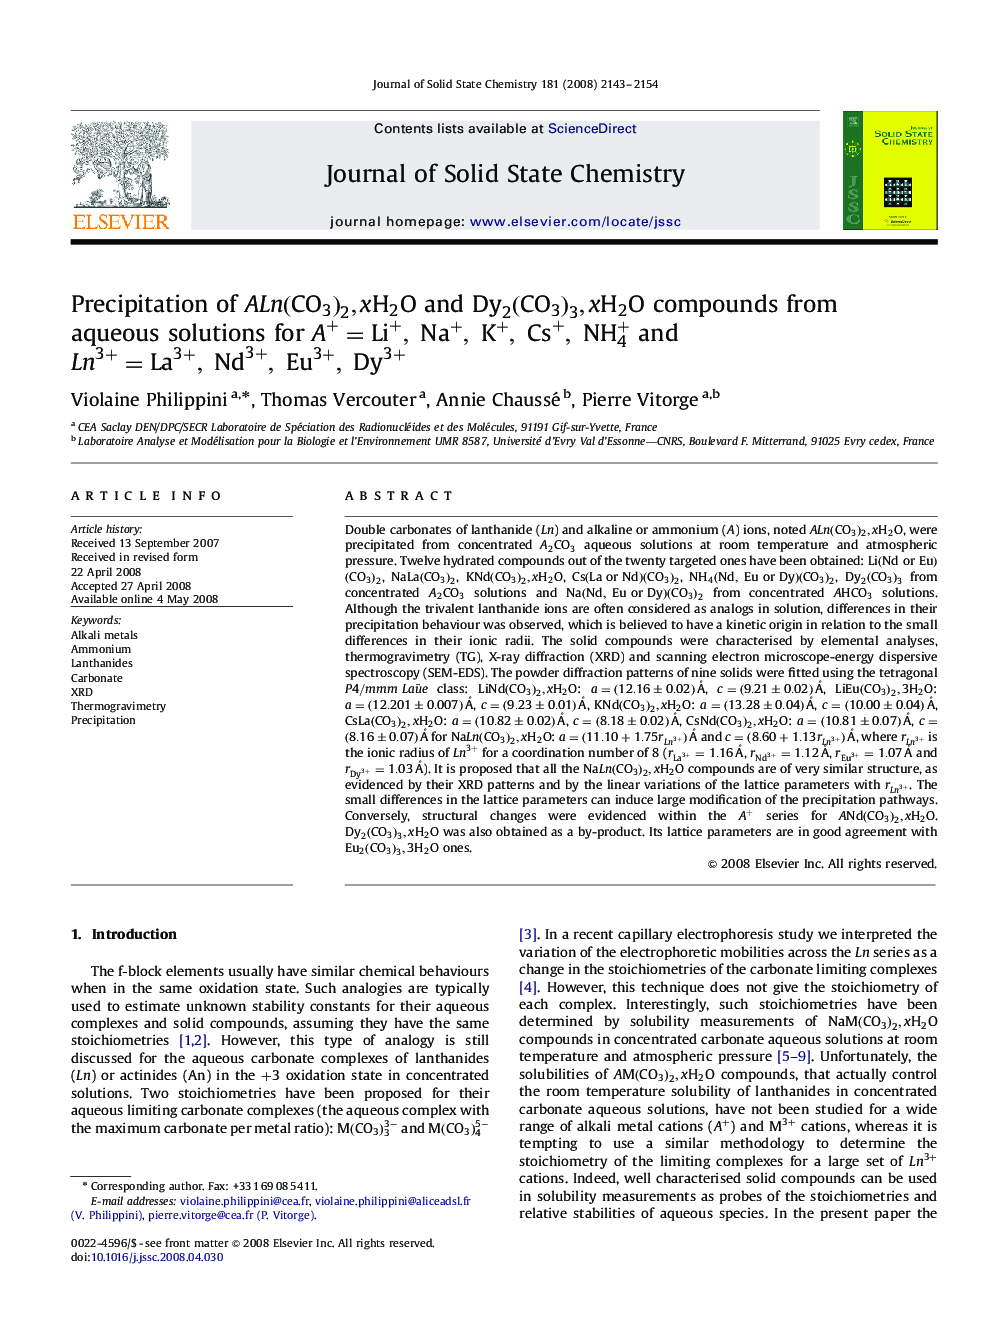 Precipitation of ALn(CO3)2,xH2OALn(CO3)2,xH2O and Dy2(CO3)3,xH2ODy2(CO3)3,xH2O compounds from aqueous solutions for A+=Li+,Na+,K+,Cs+,NH4+ and Ln3+=La3+,Nd3+,Eu3+,Dy3+